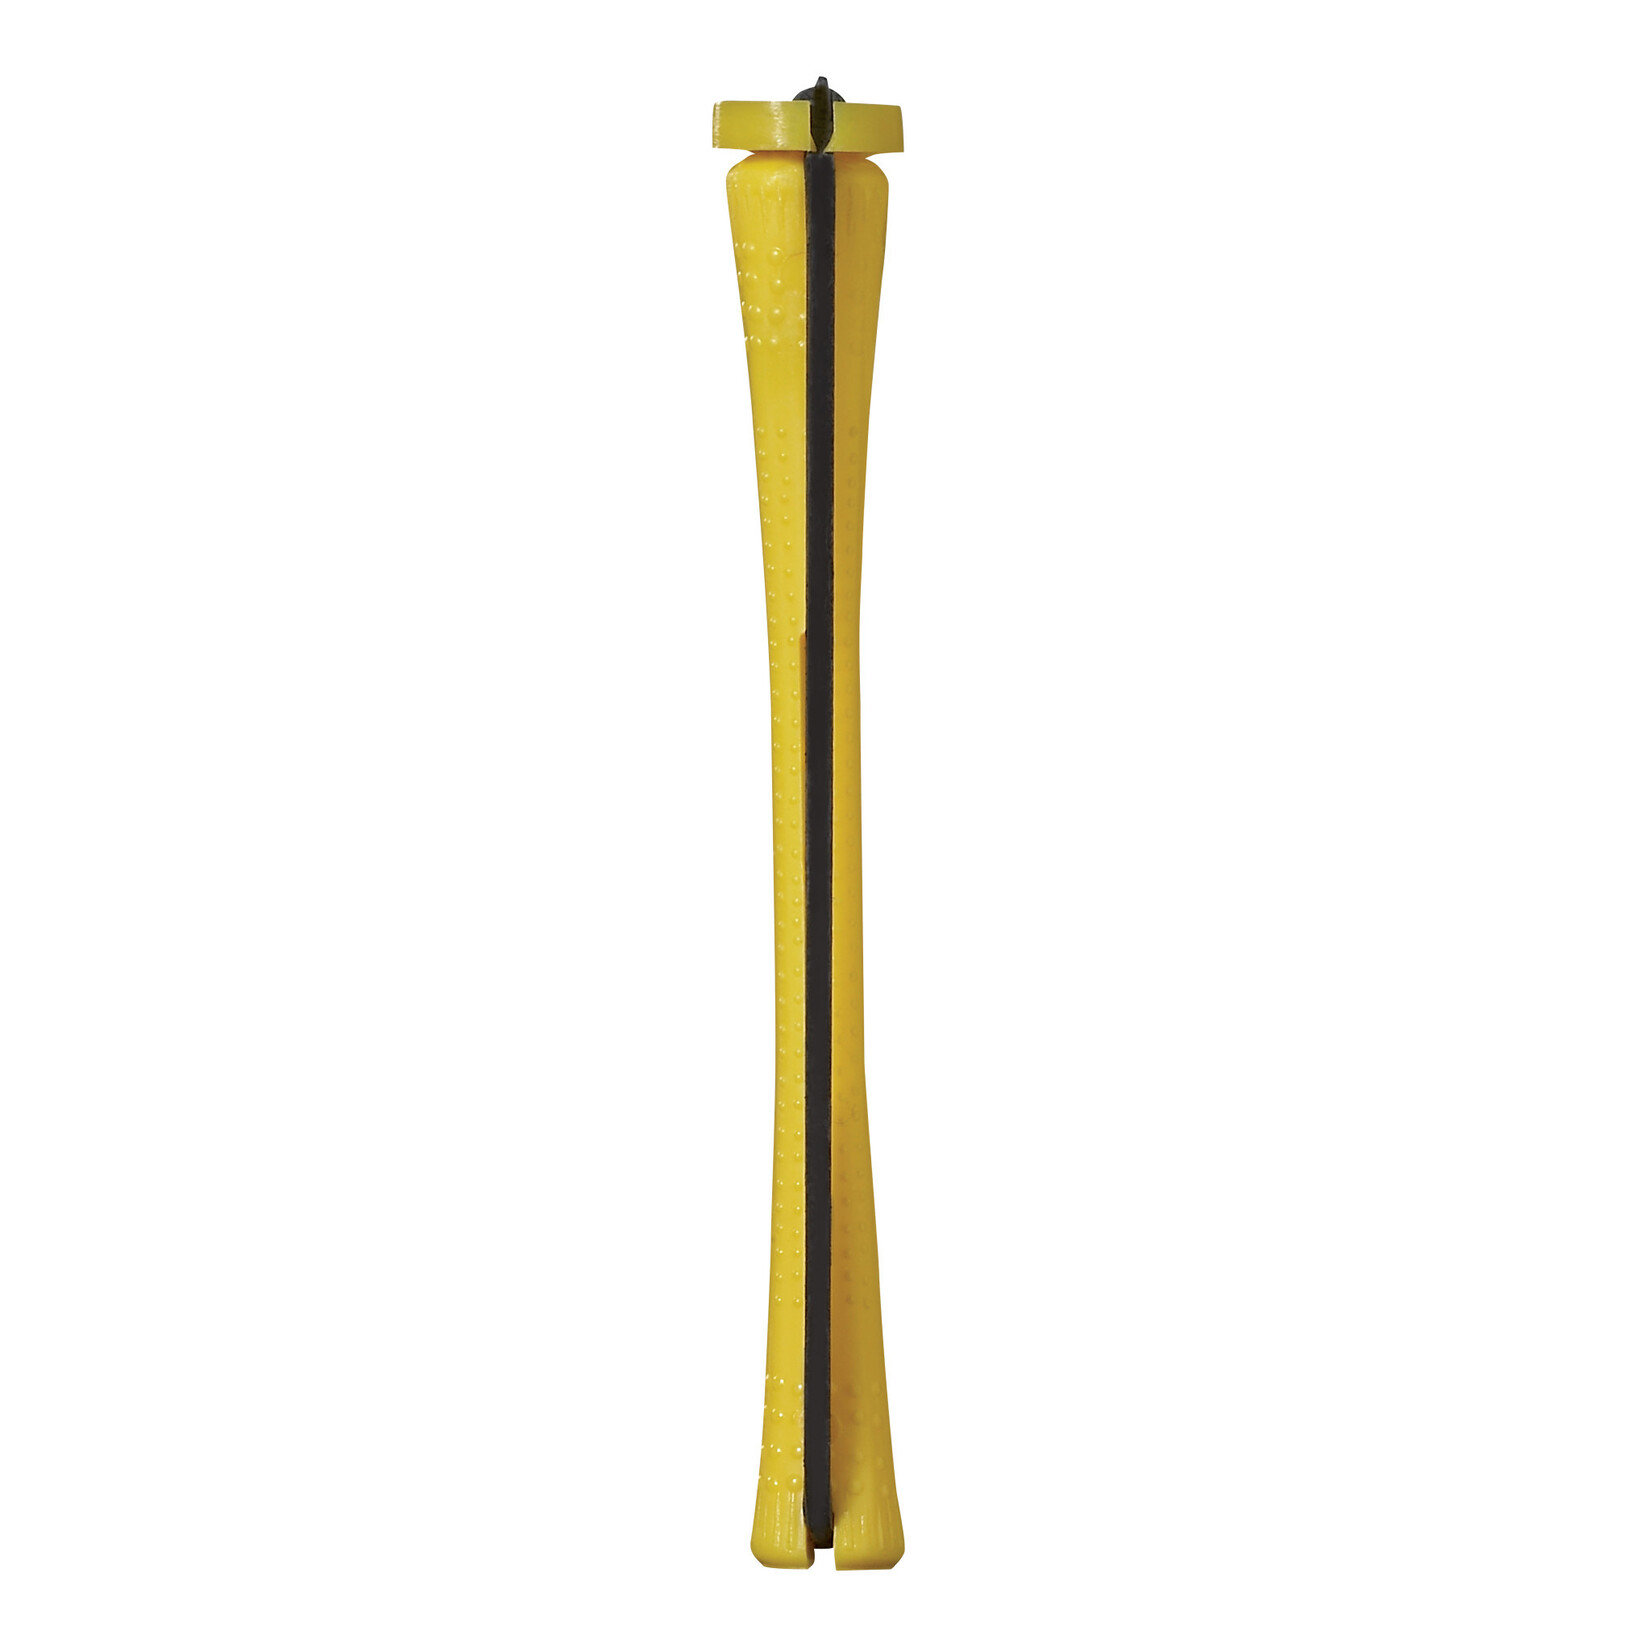 Dannyco Dannyco - Cold Wave Yellow Rods - 12/Bag